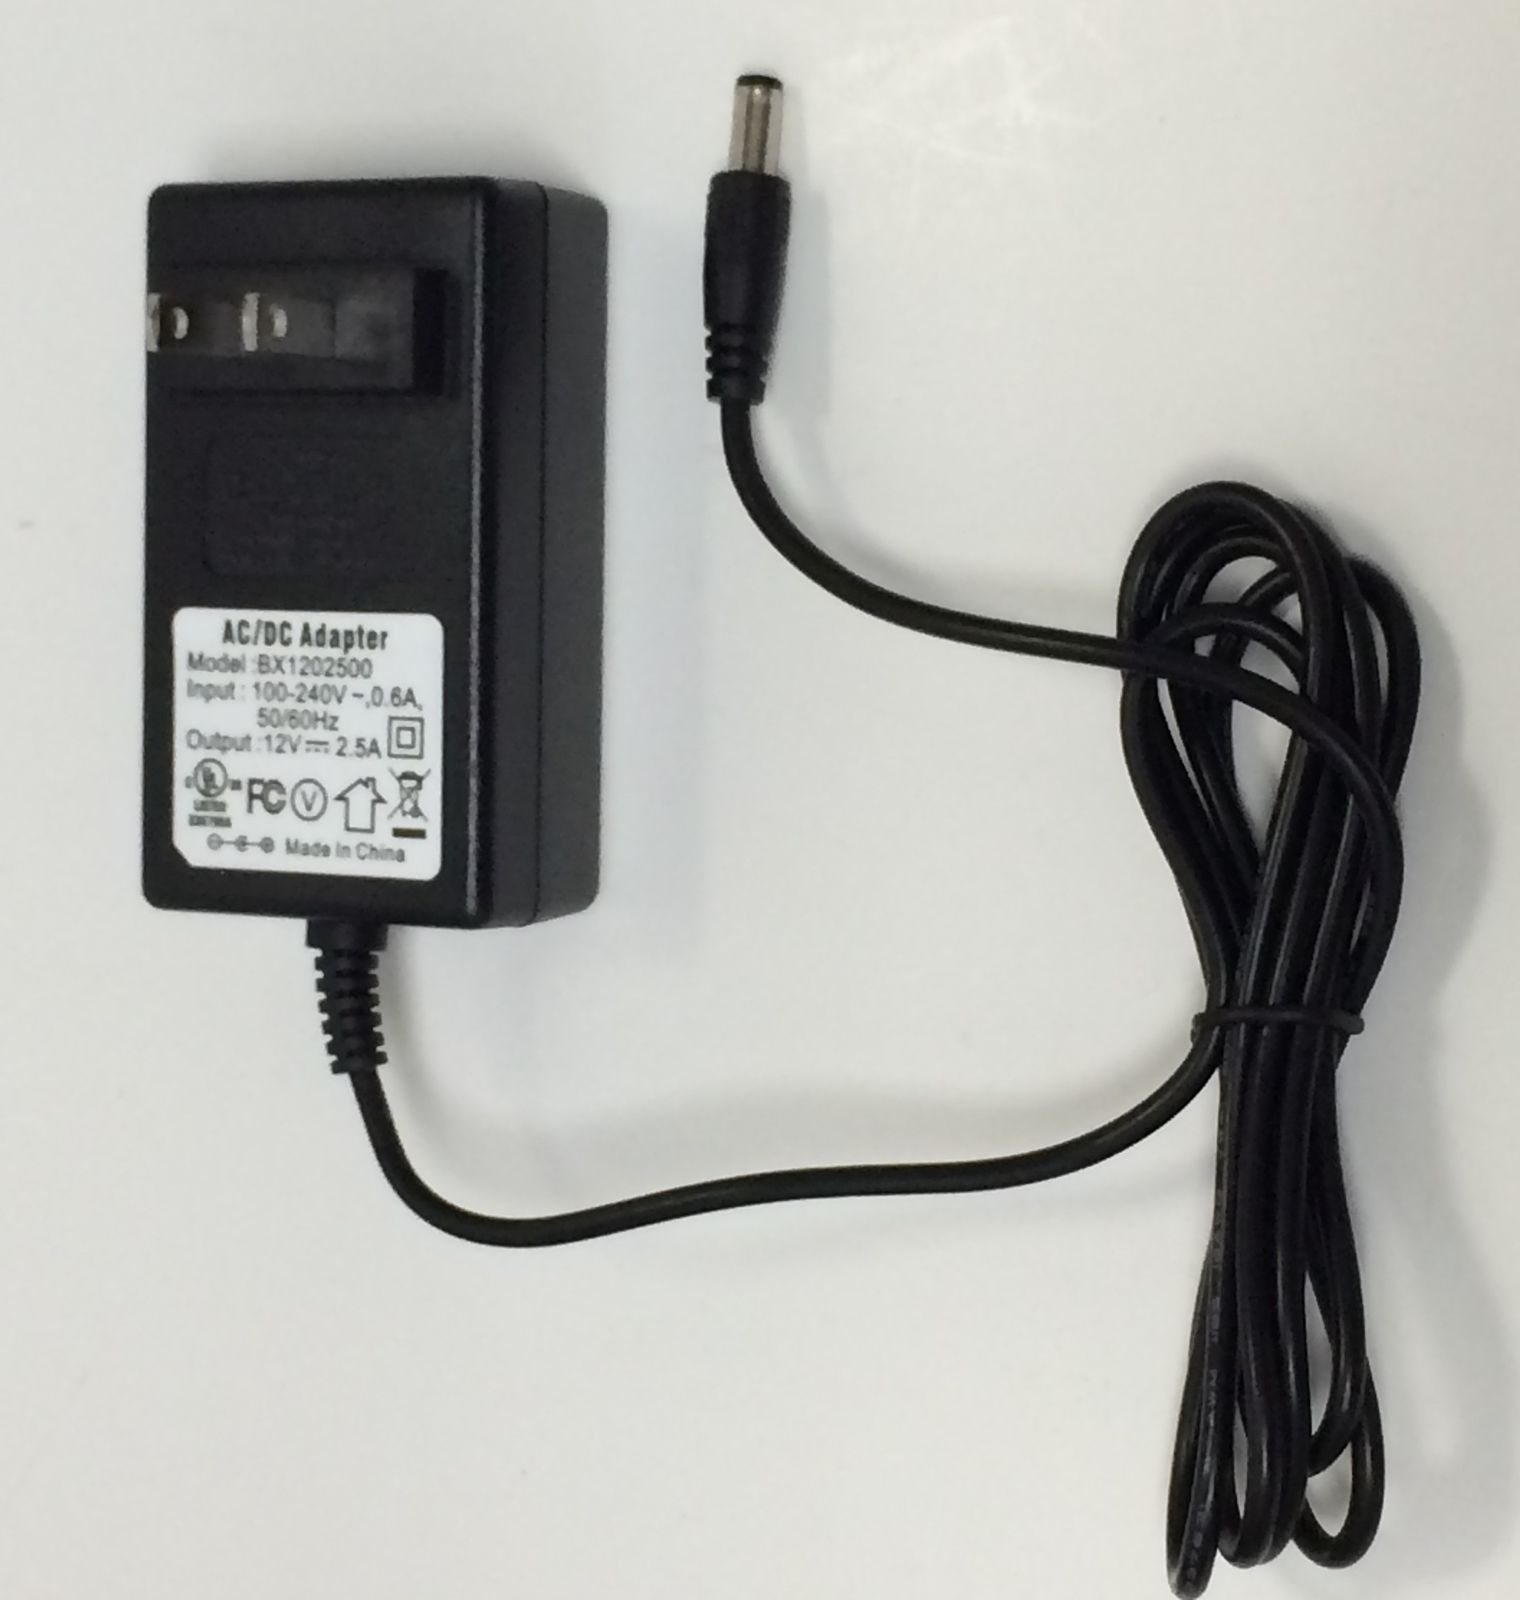 Brand new 12V 2.5A AC/DC Adapter For Lorex BX1202500 DVR Security System